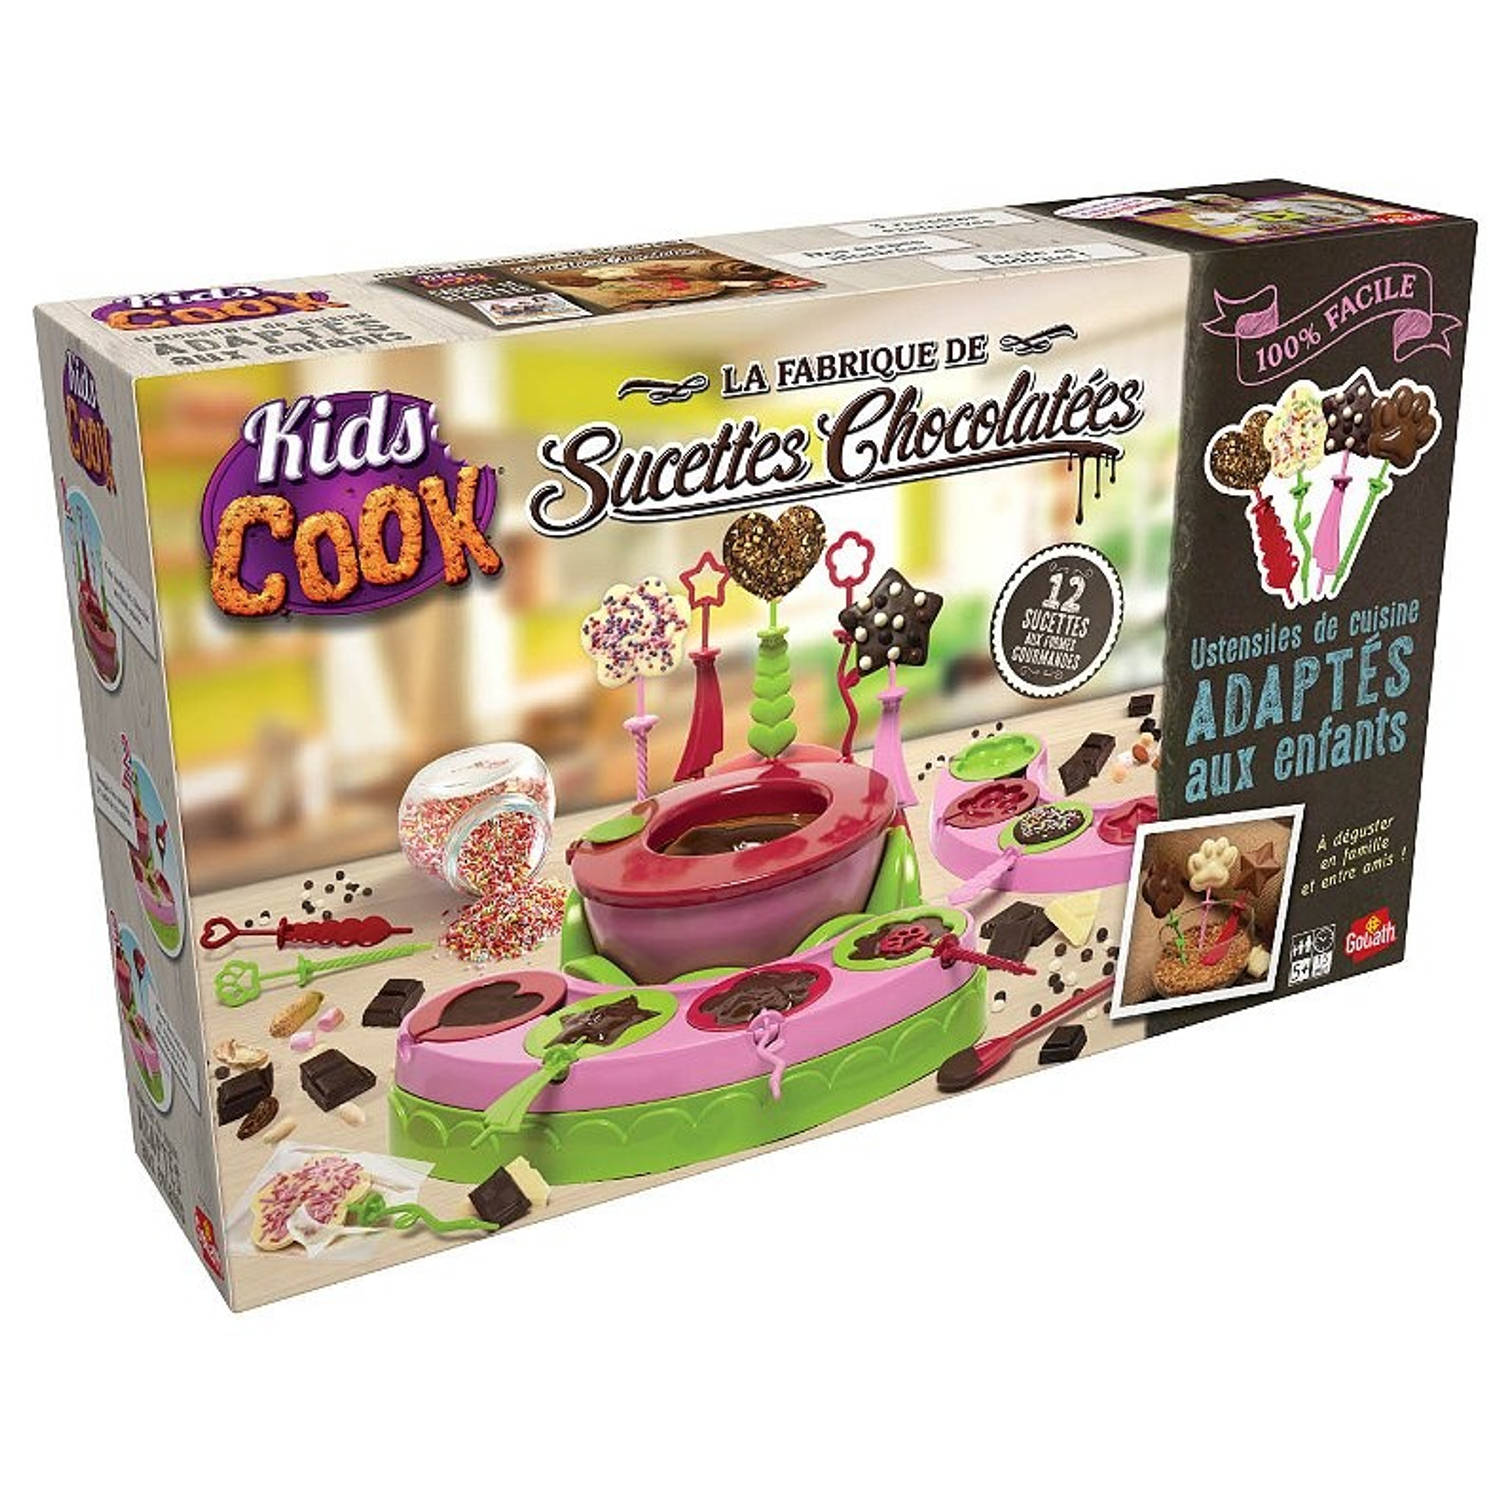 Kids Cook Sucettes Chocolatées - Chocolate Lolly Factory